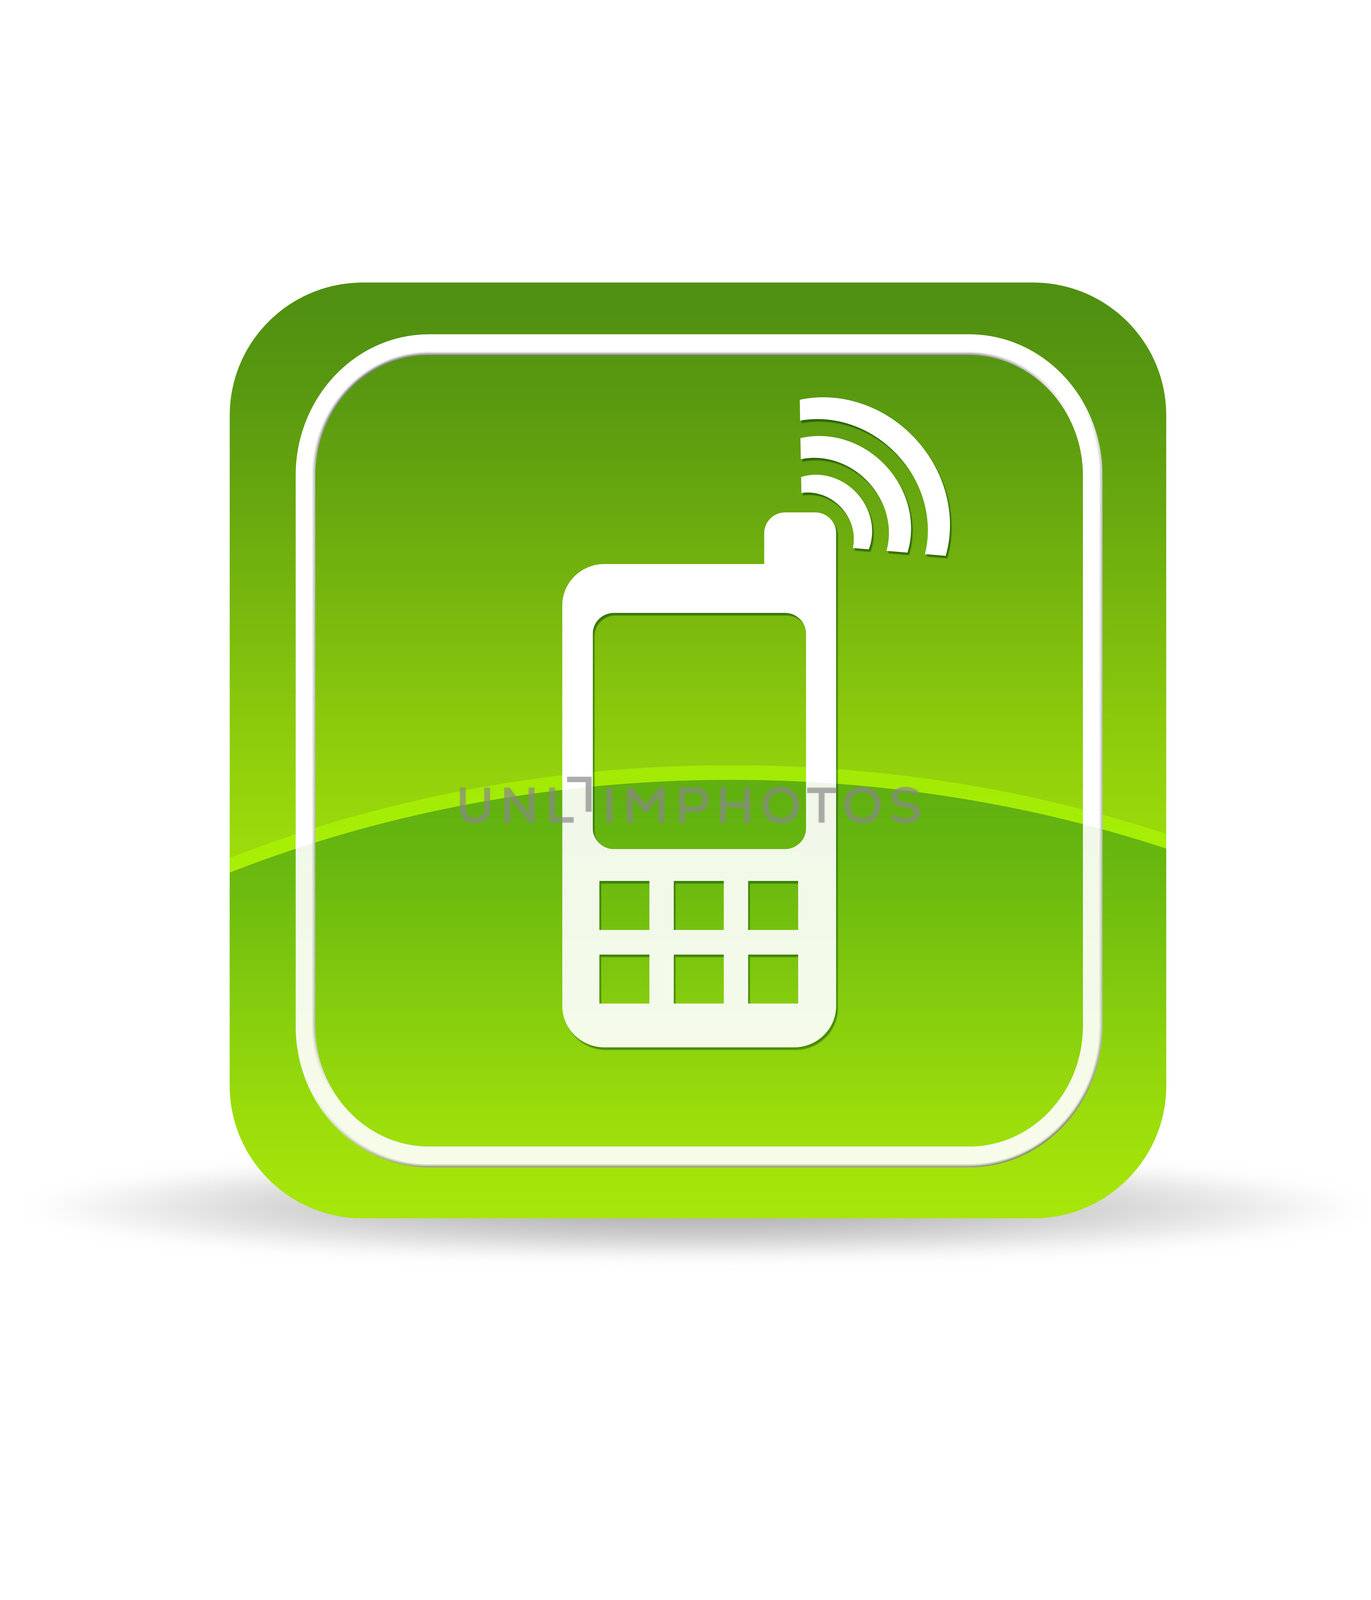 High resolution green mobile phone icon on white background.